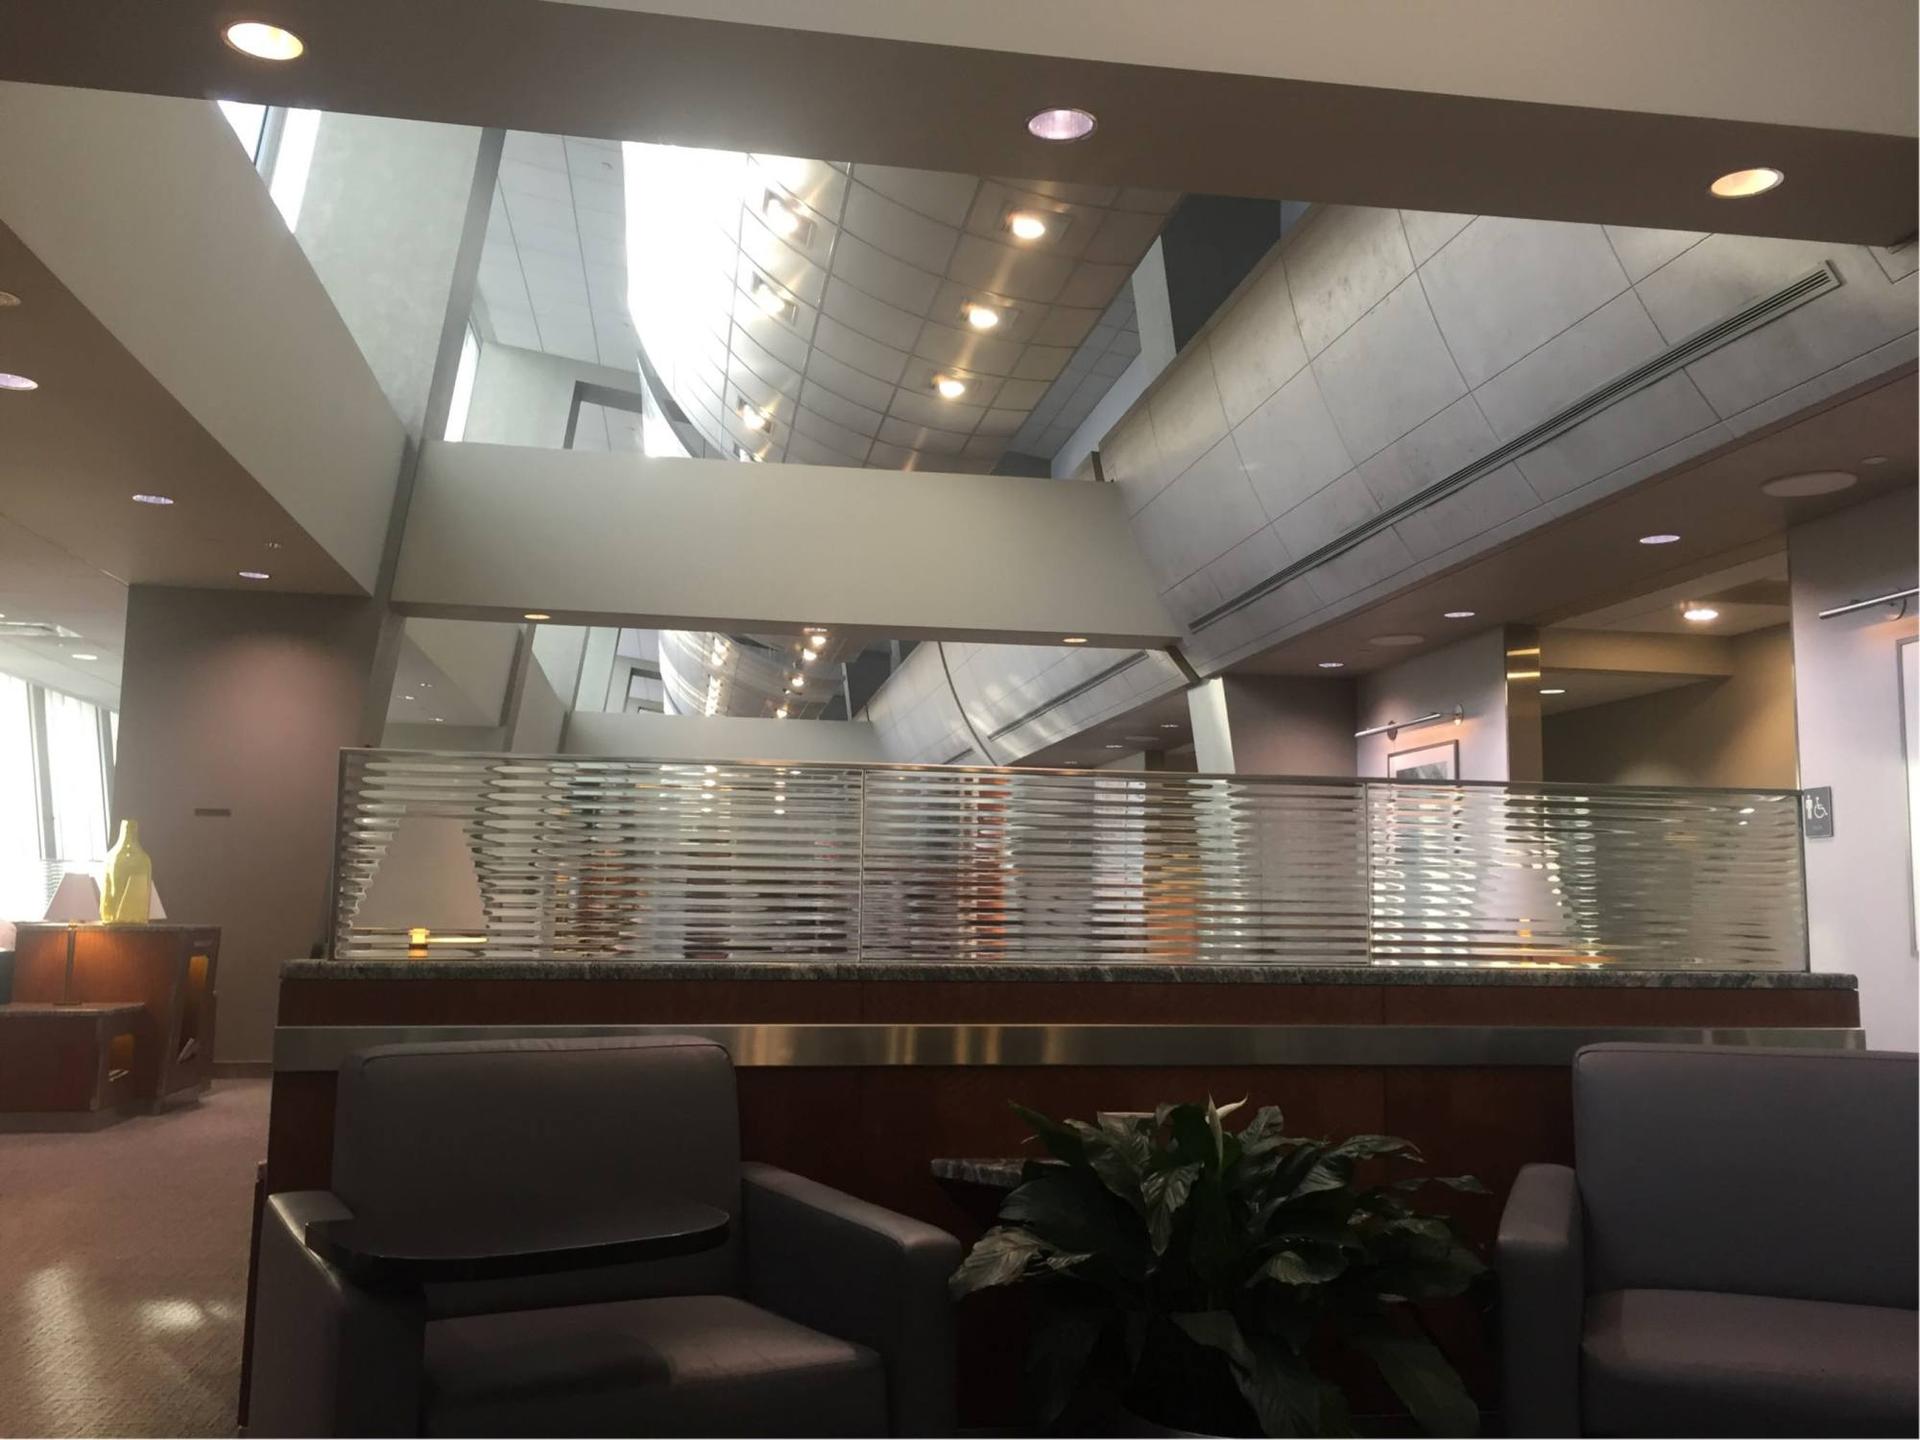 American Airlines Admirals Club image 42 of 48